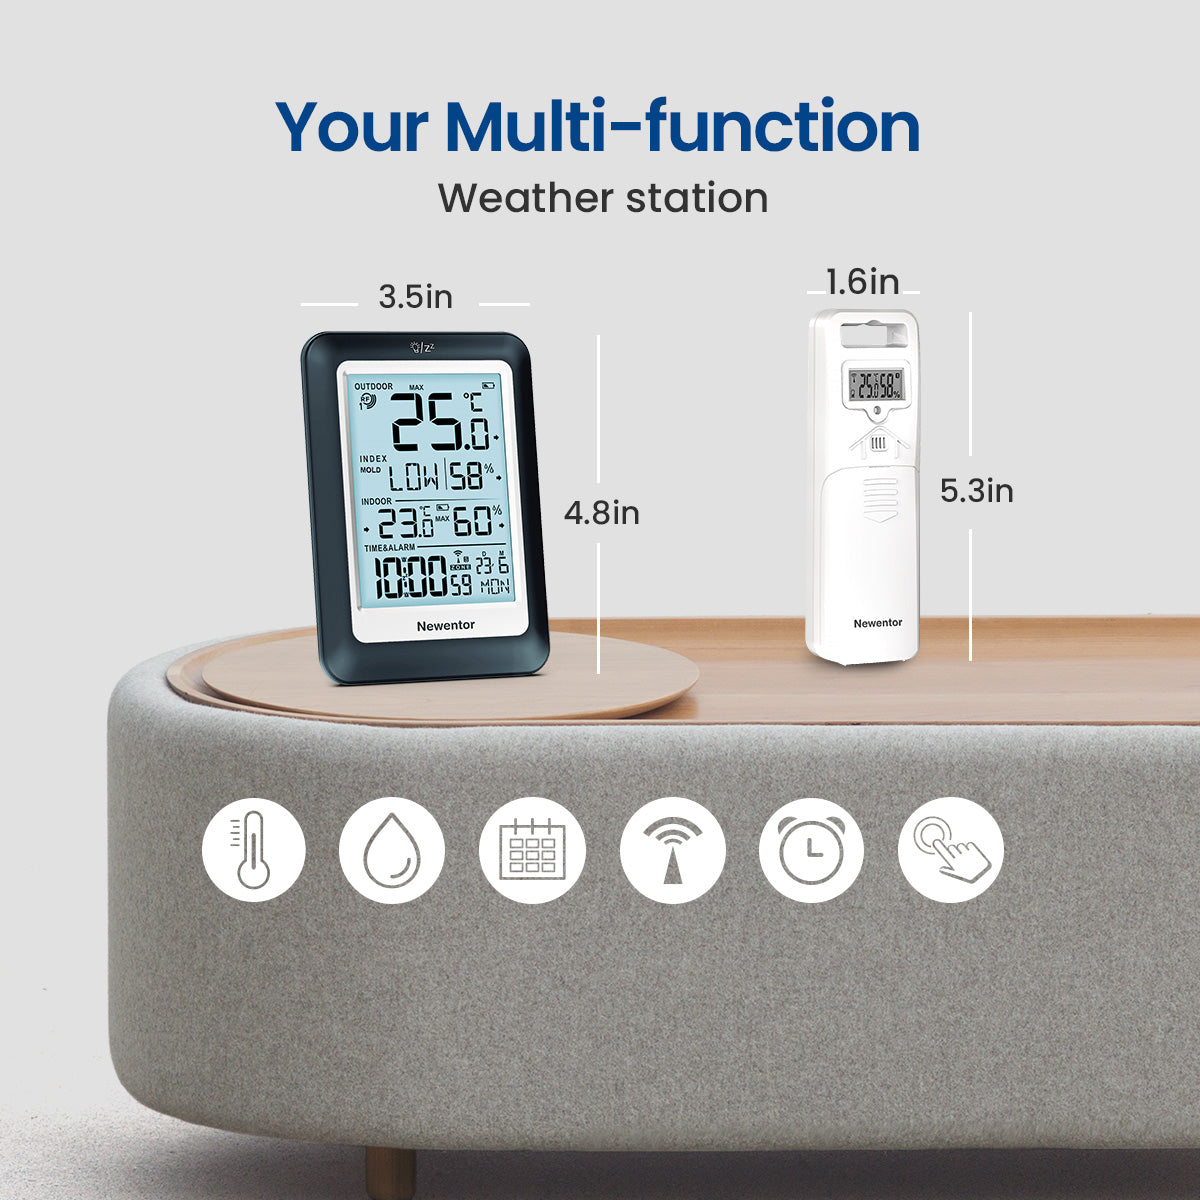 Newentor® Color Home Weather Station Q5 - Wireless Atomic All-In-1